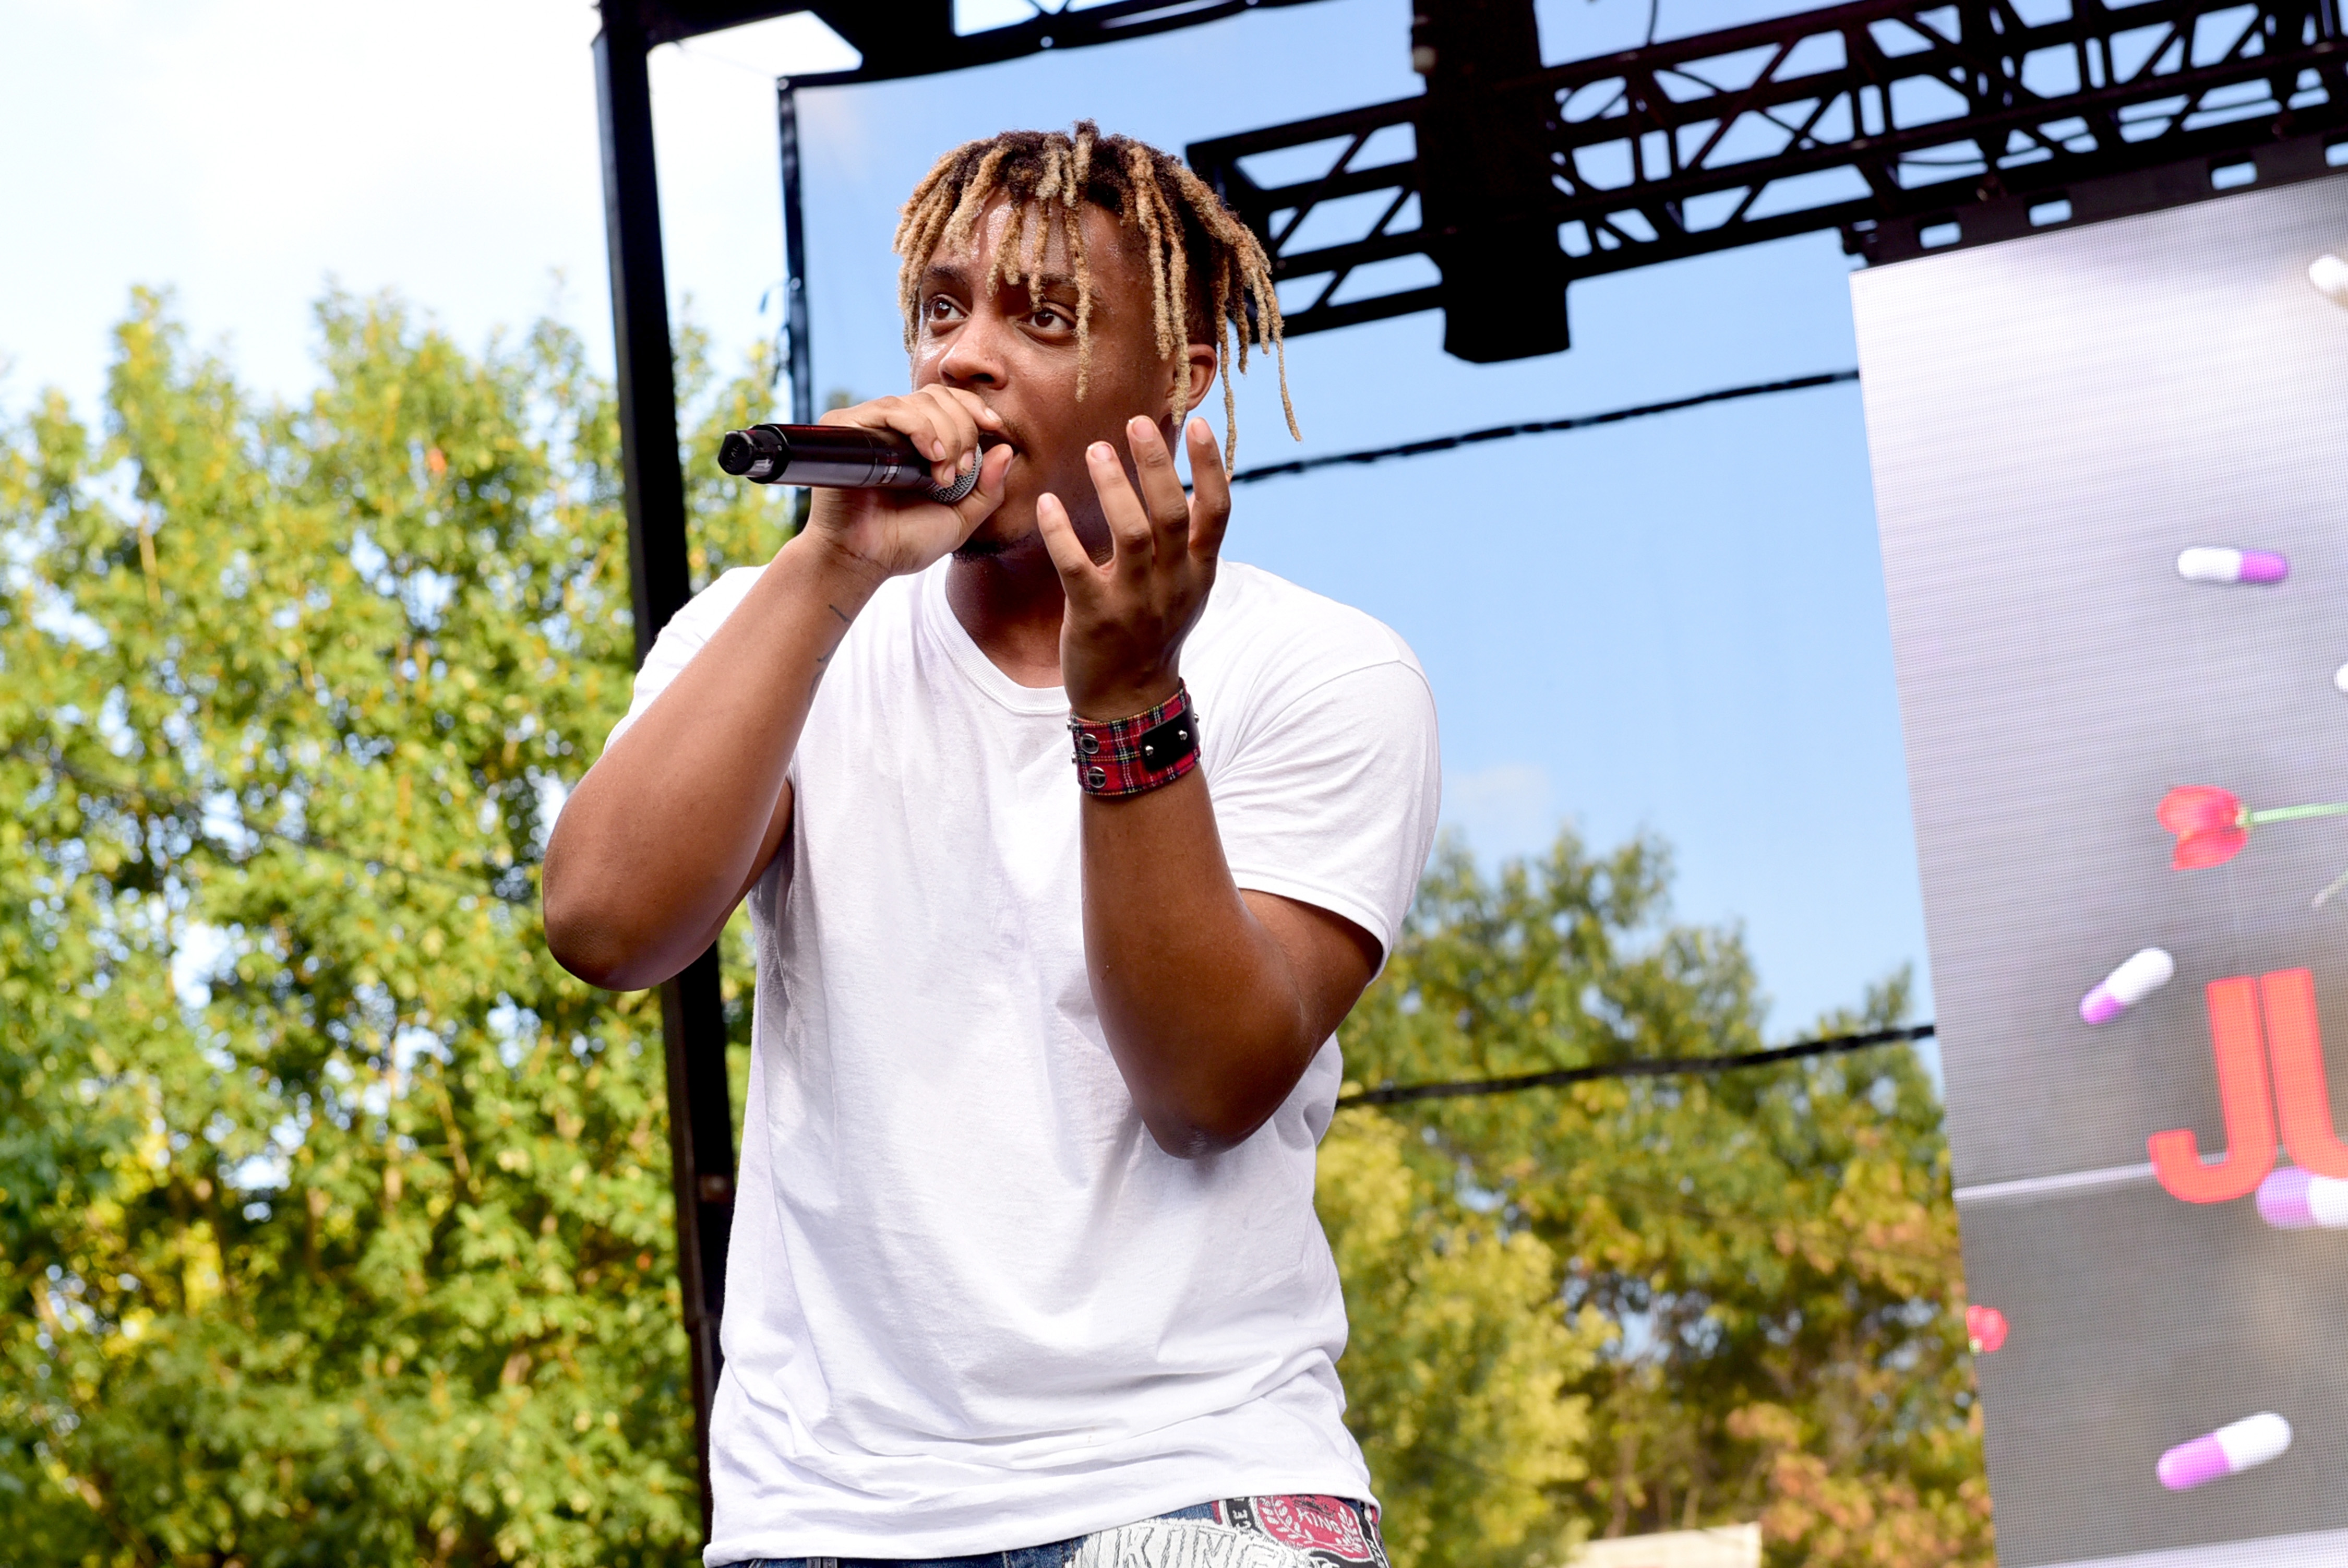 Juice Wrld songs dominate Spotify, Apple Music after rapper's death